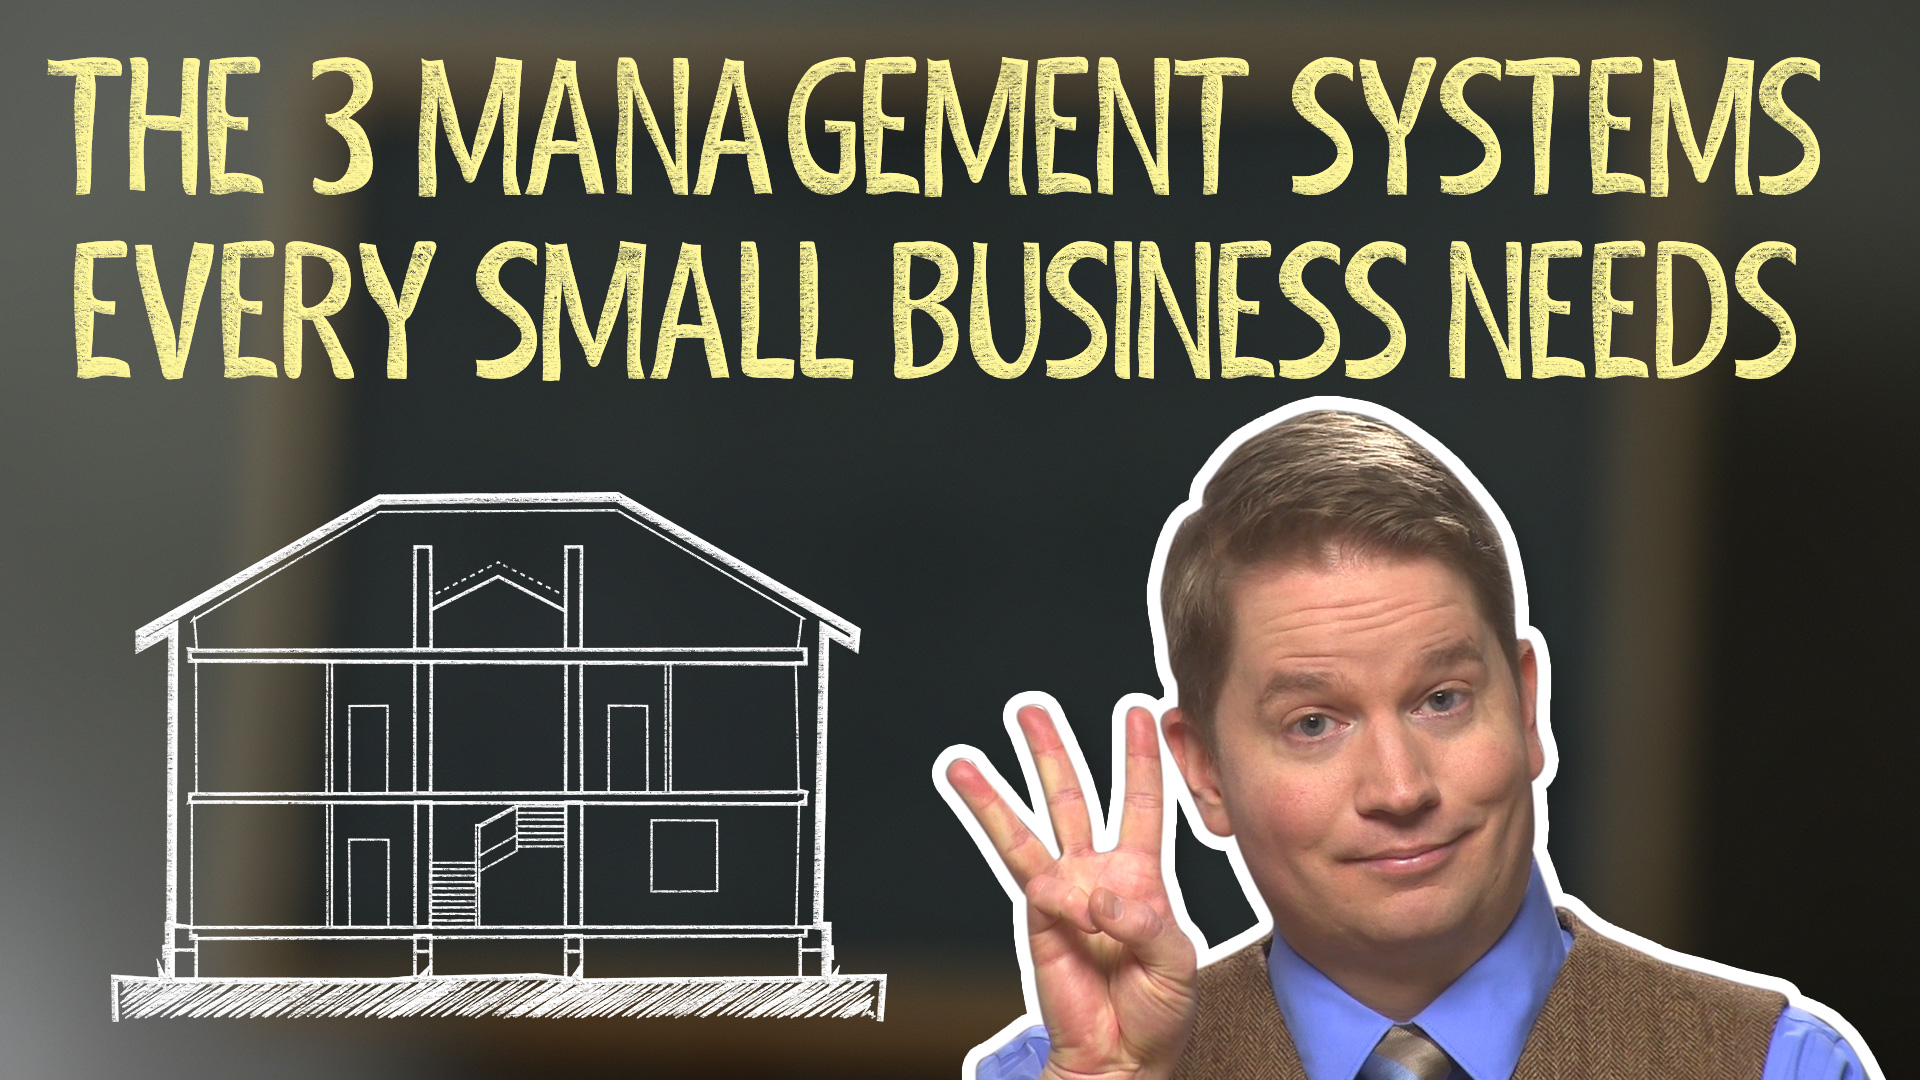 How to Set Up Management Systems for Your Small Business